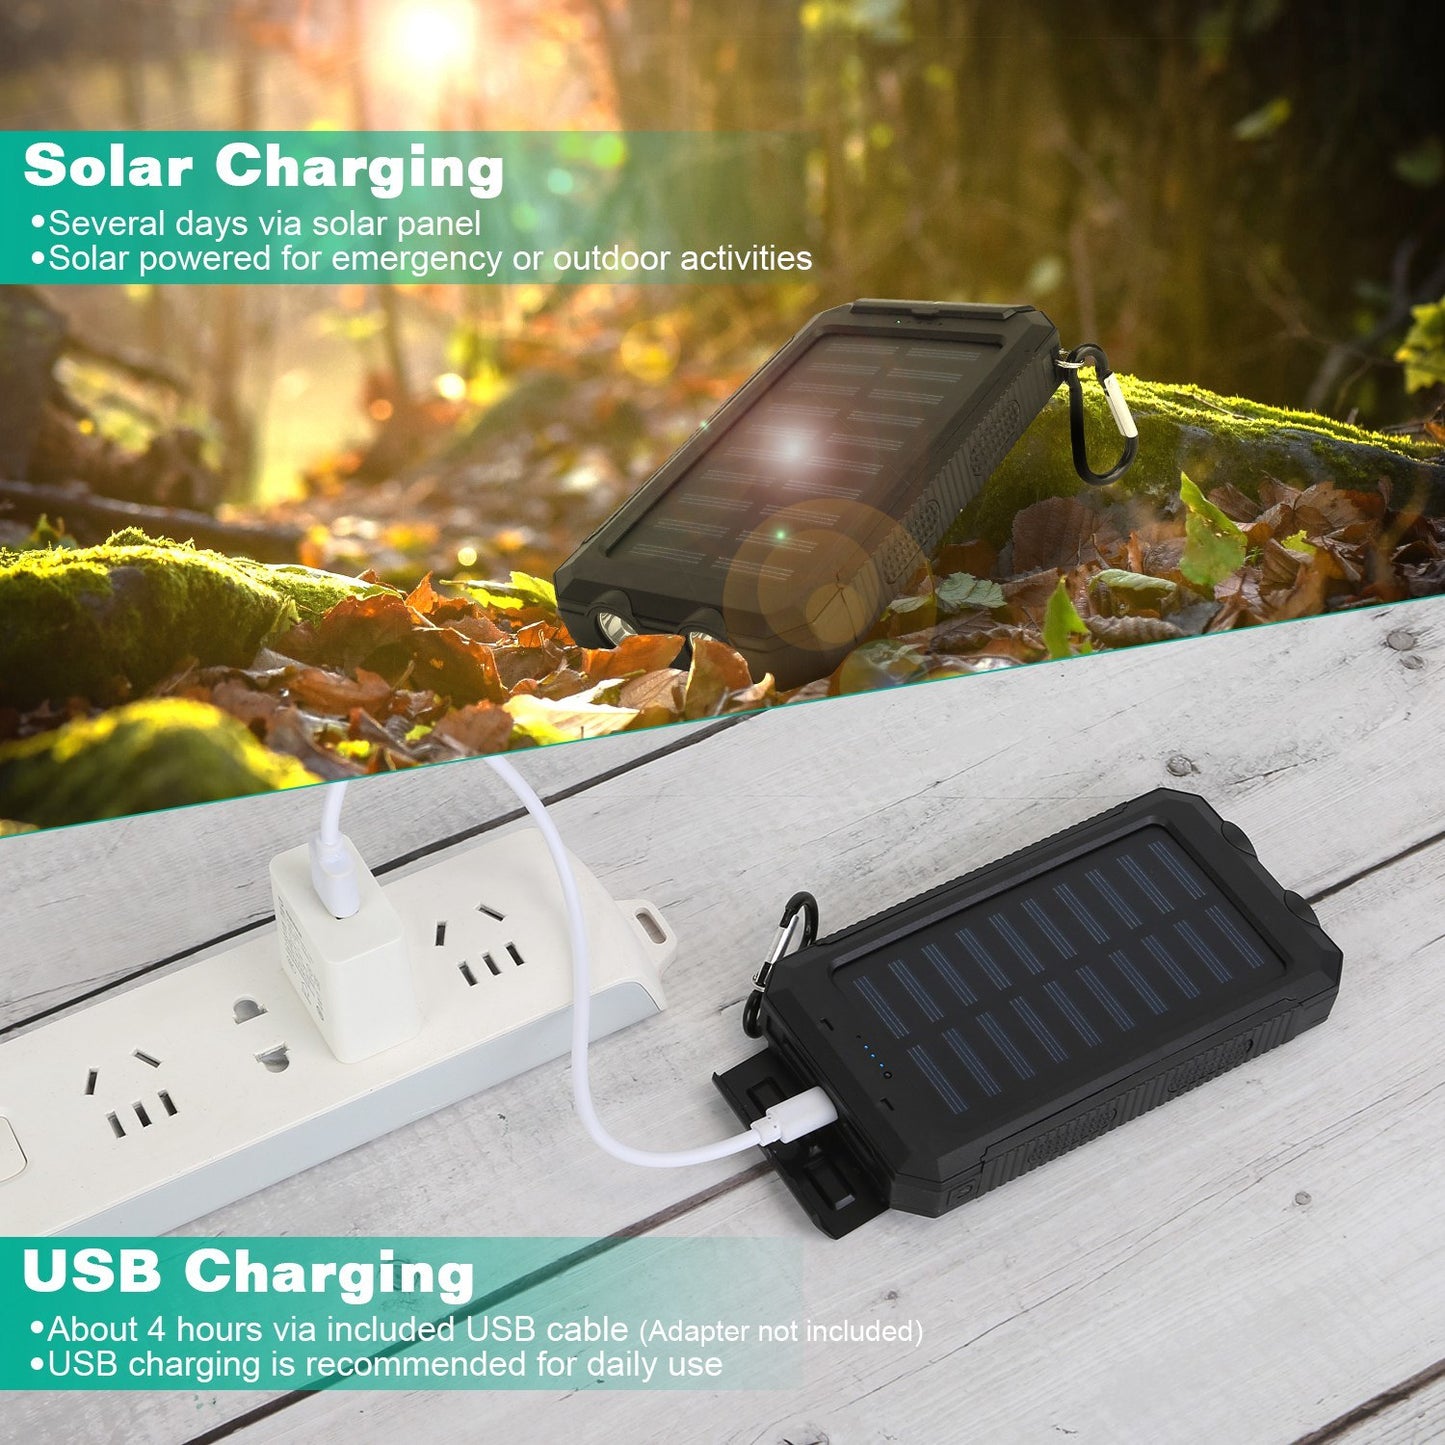 Portable 10000mAh Solar Charger Power Bank for Camping with Dual USB Ports, Battery Indicators, SOS LED Lights & Built-in Compass